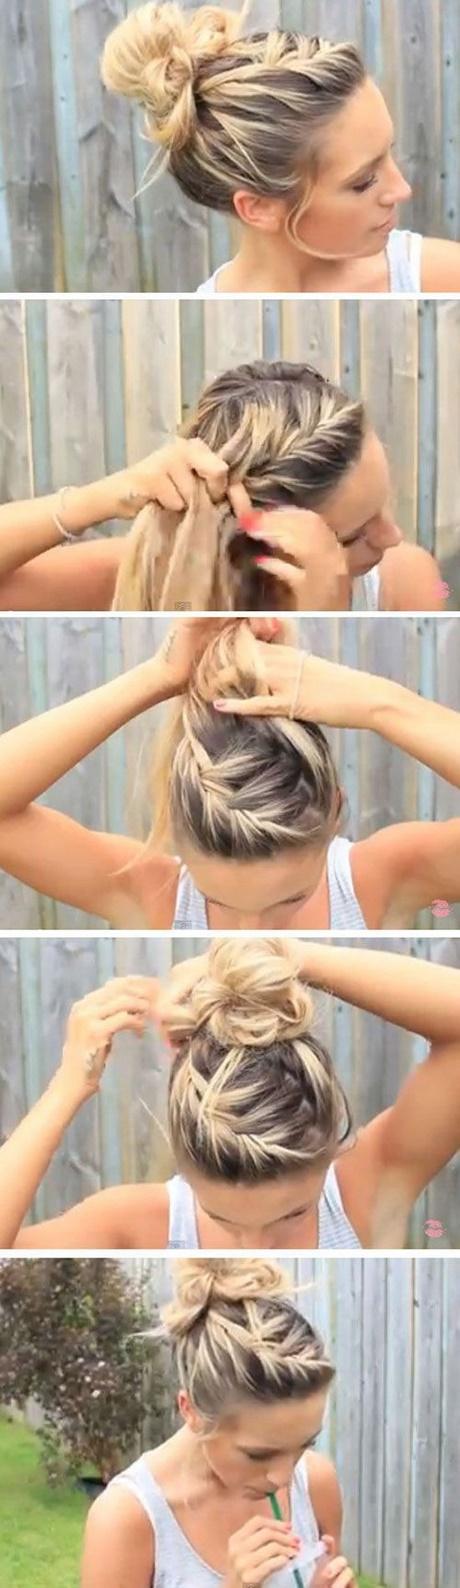 Simple hair updos for everyday simple-hair-updos-for-everyday-05_14